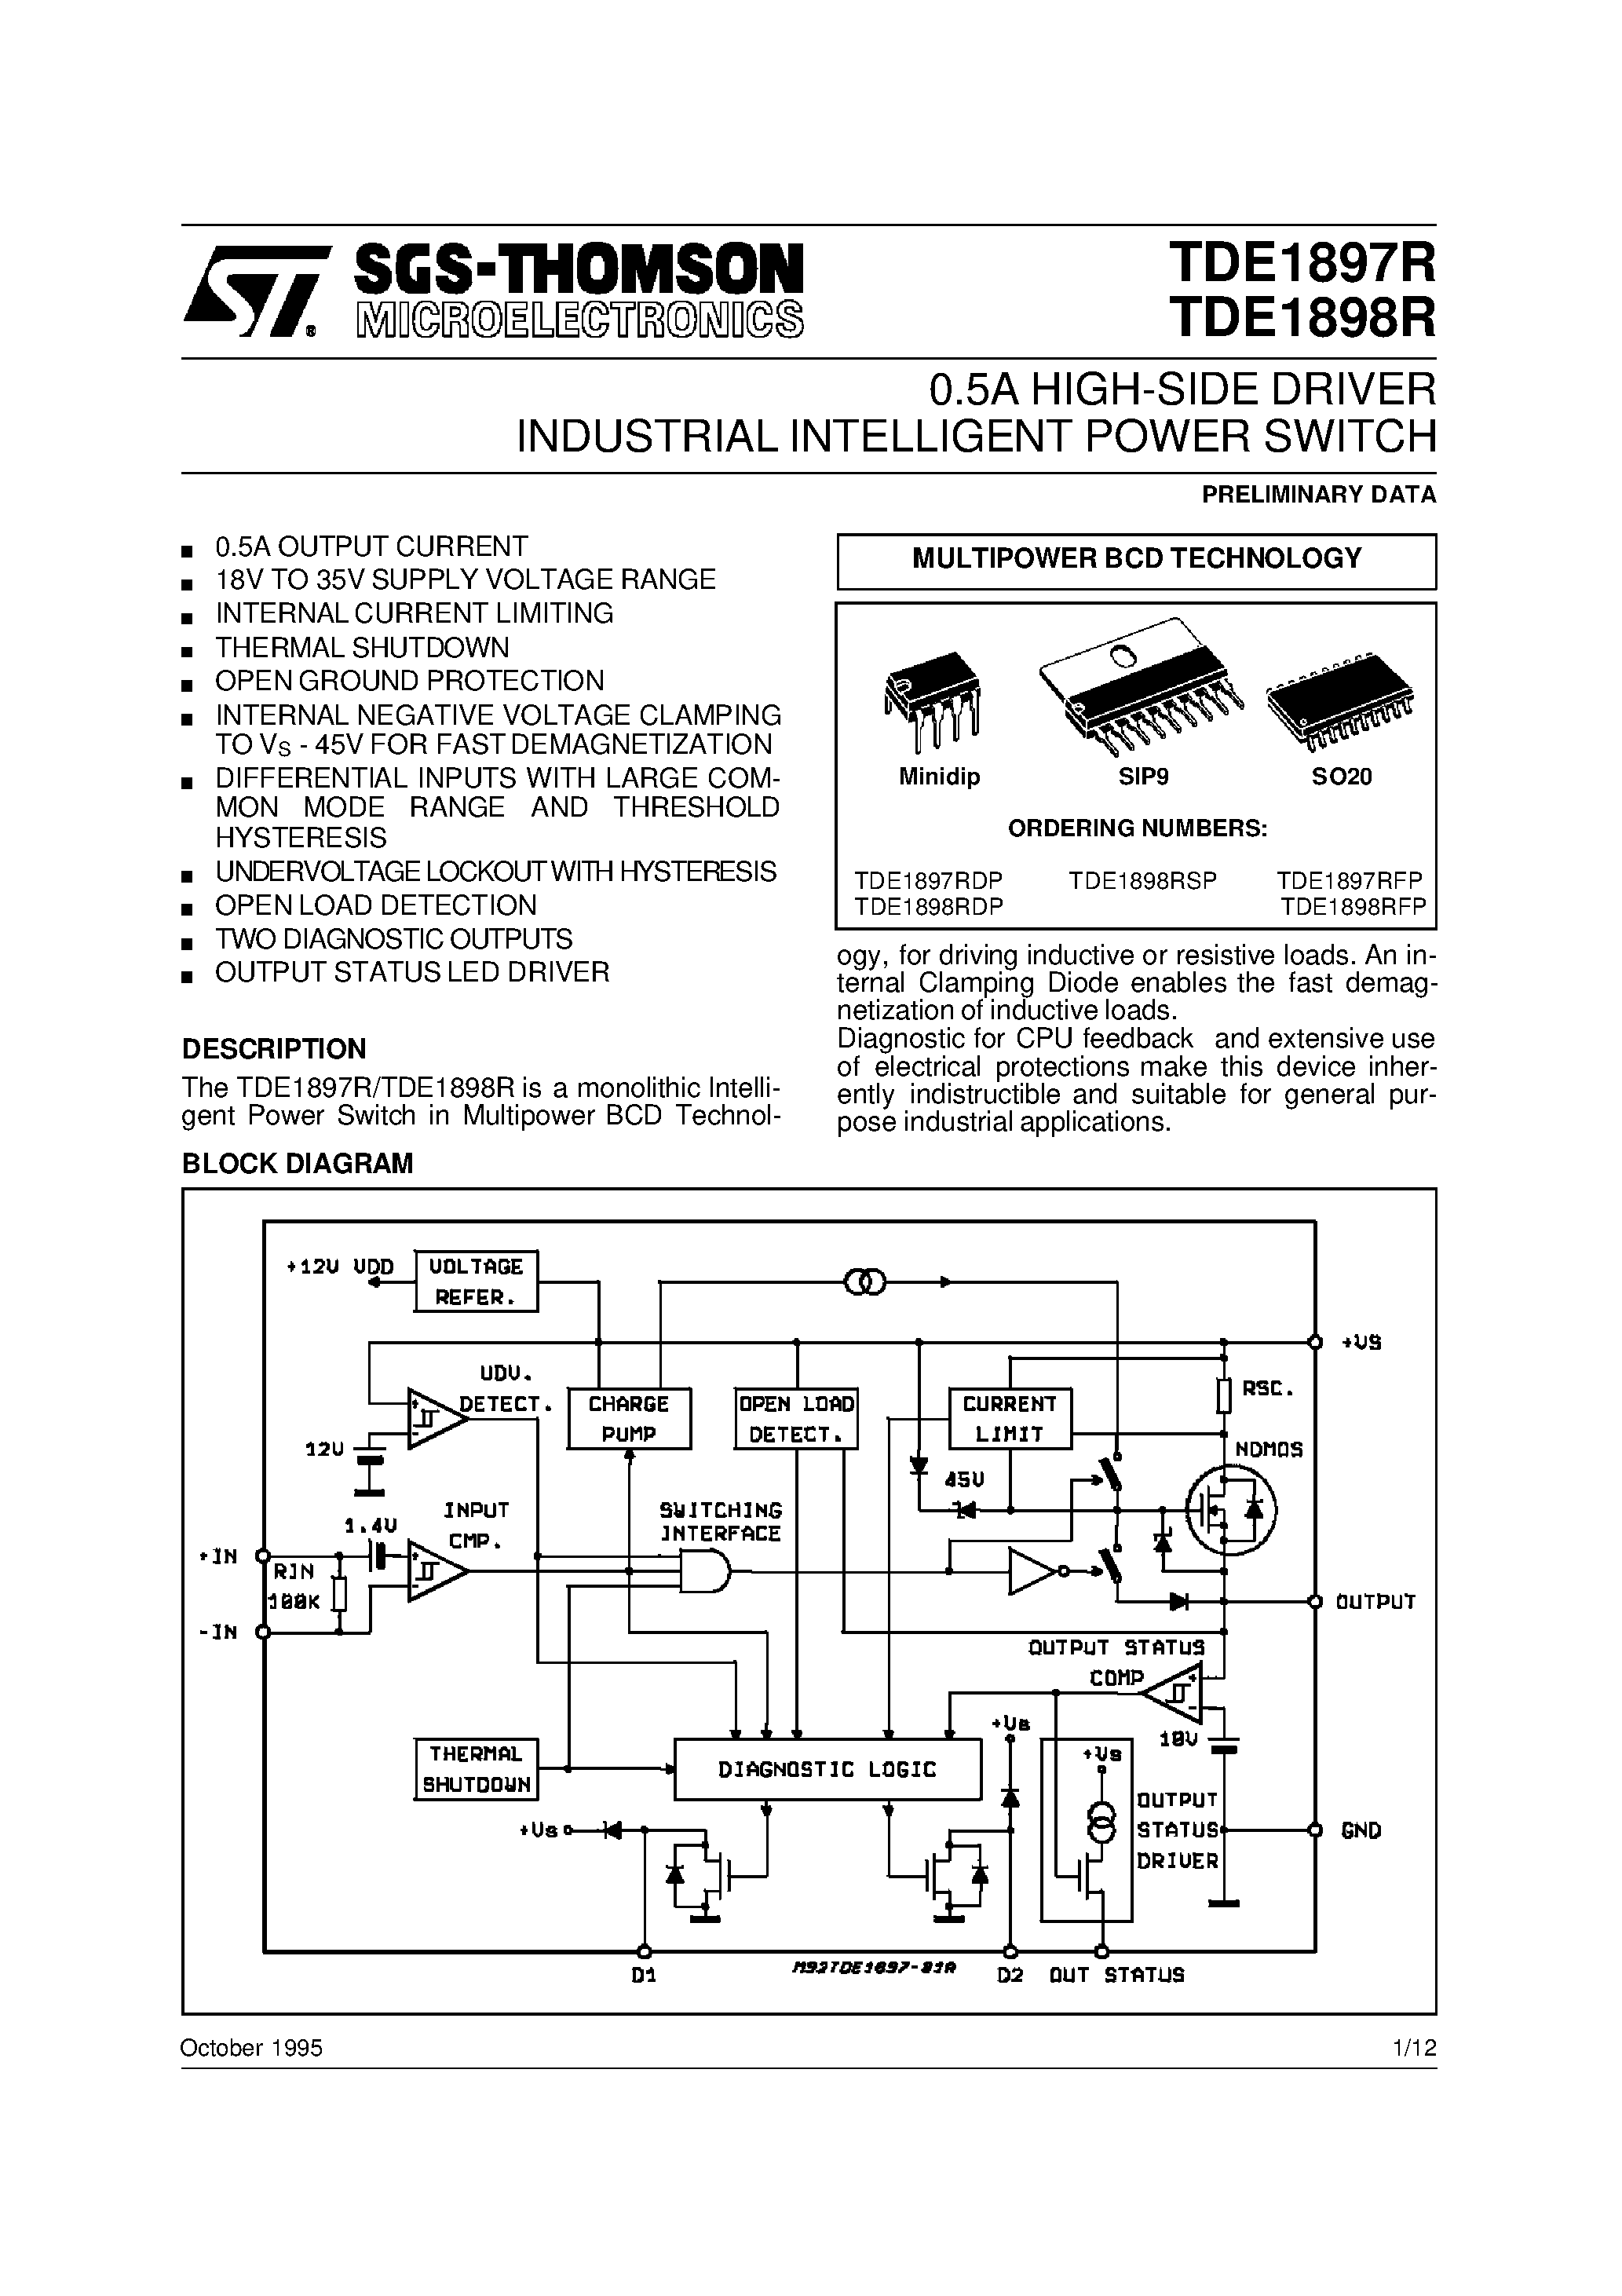 Datasheet TDE1898RSP - 0.5A HIGH-SIDE DRIVER INDUSTRIAL INTELLIGENT POWER SWITCH page 1